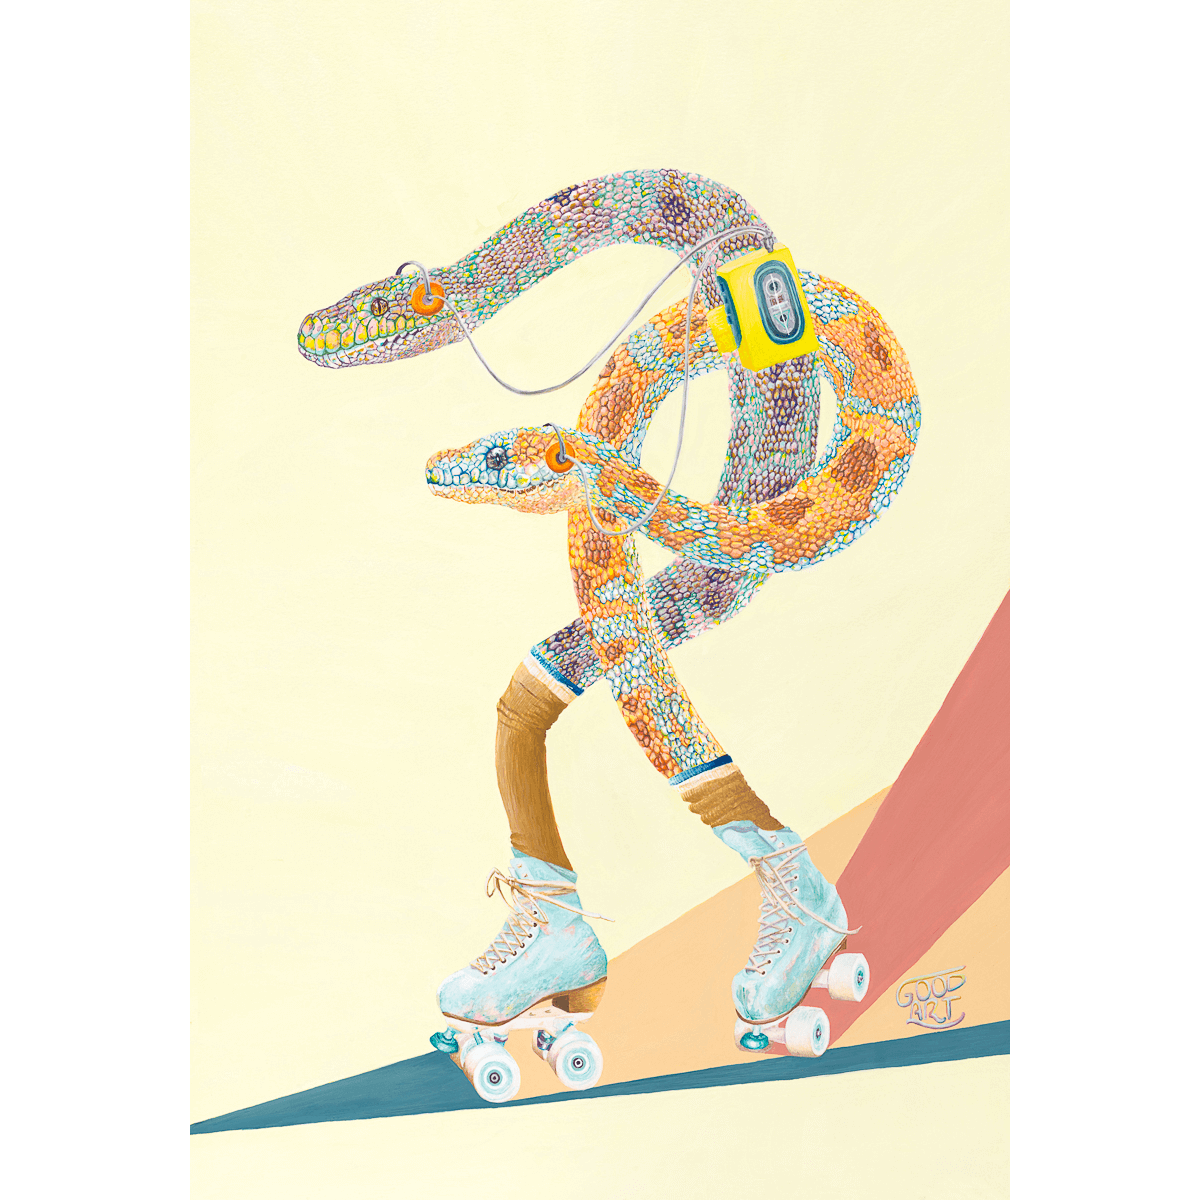 An artwork of Western Australian Carpet Pythons roller skating, whilst listening to a walkman. In a retro styled Art print. Mellow yellow background.